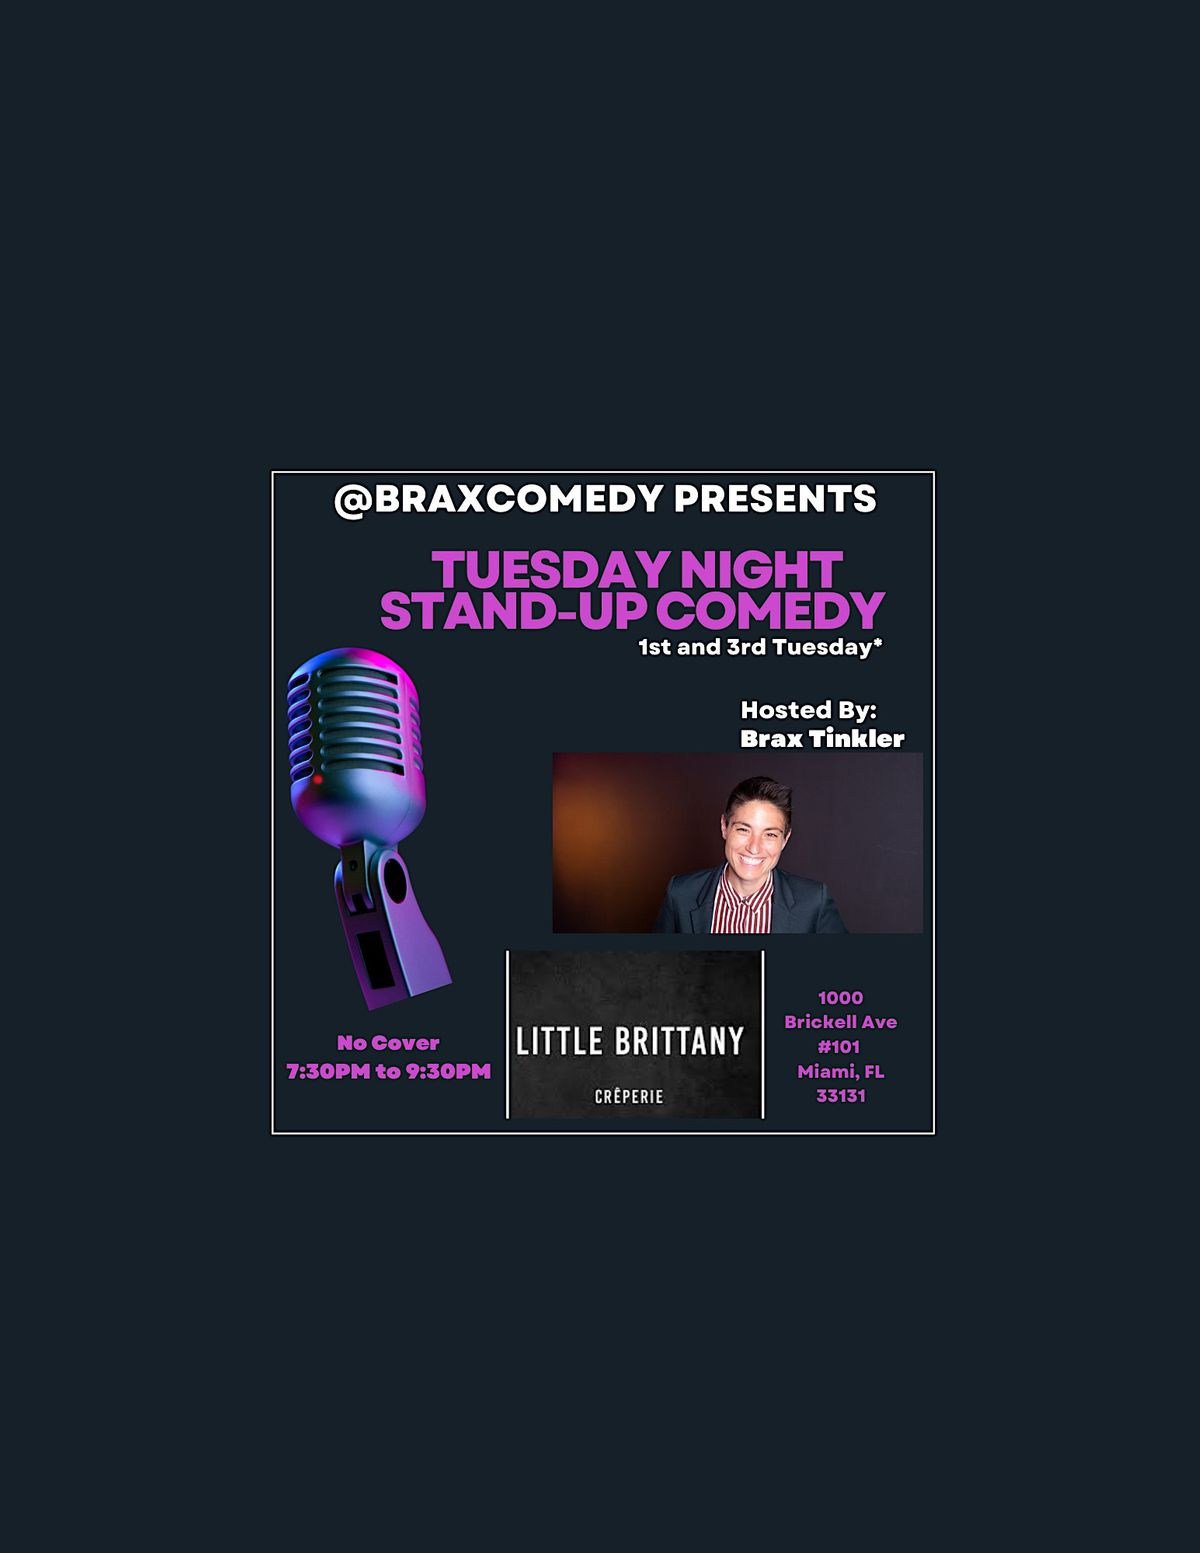 Free Stand-Up Comedy Show in Brickell